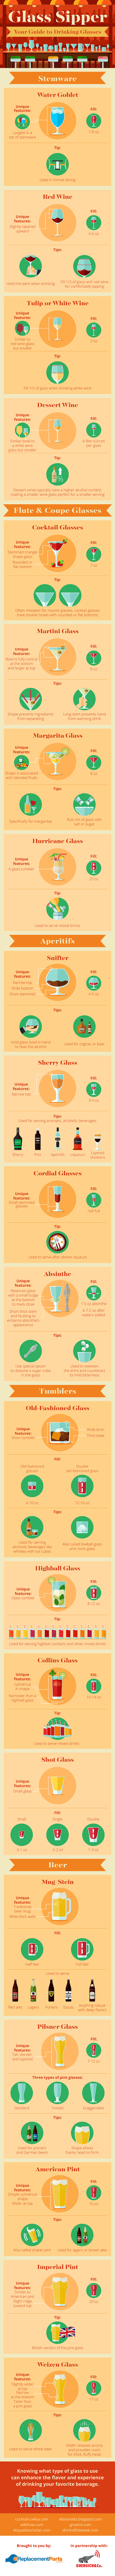 Glass Sipper: Guide to Drinking Glasses #infographic